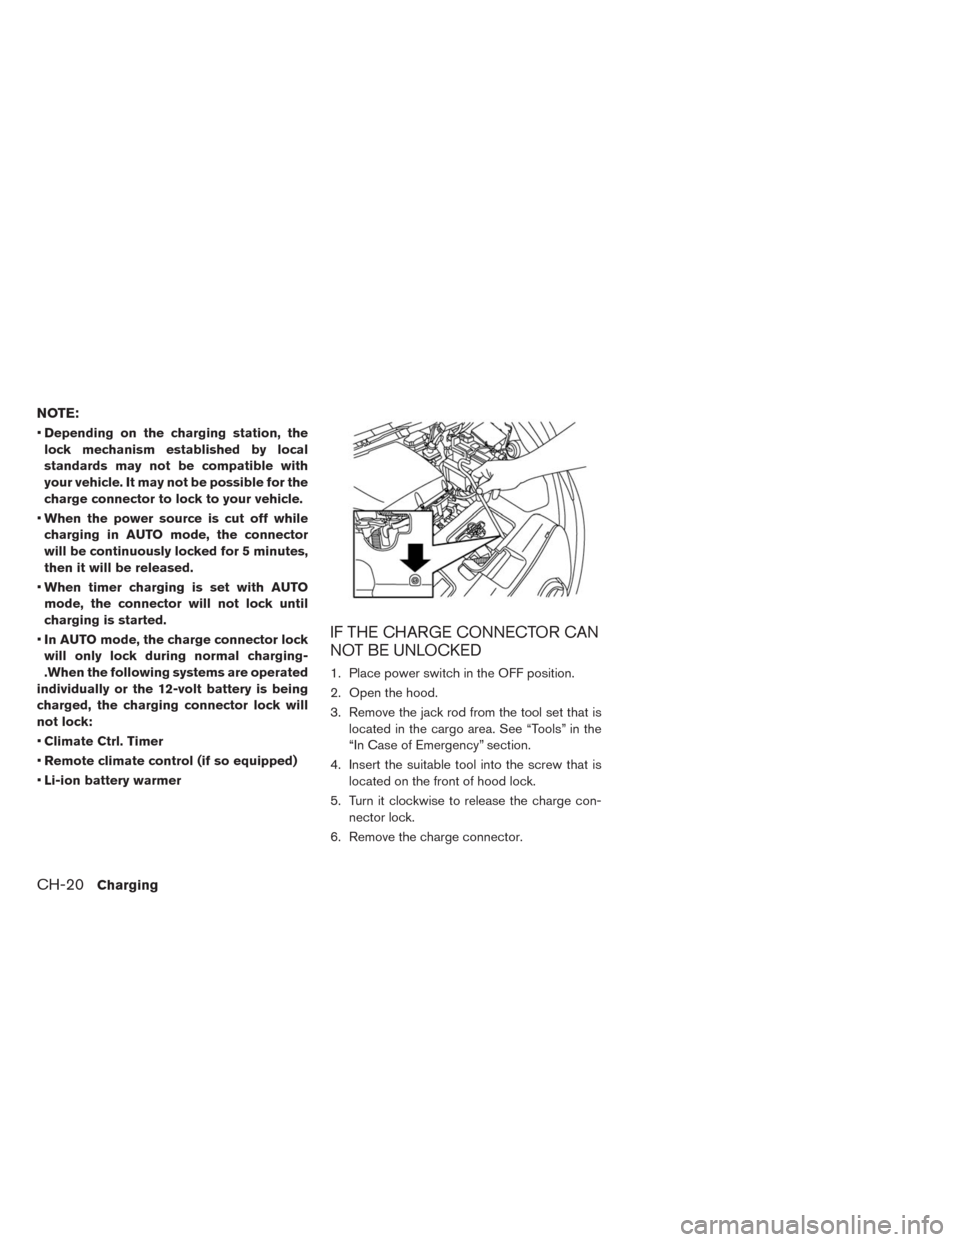 NISSAN LEAF 2014 1.G Repair Manual NOTE:
•Depending on the charging station, the
lock mechanism established by local
standards may not be compatible with
your vehicle. It may not be possible for the
charge connector to lock to your v